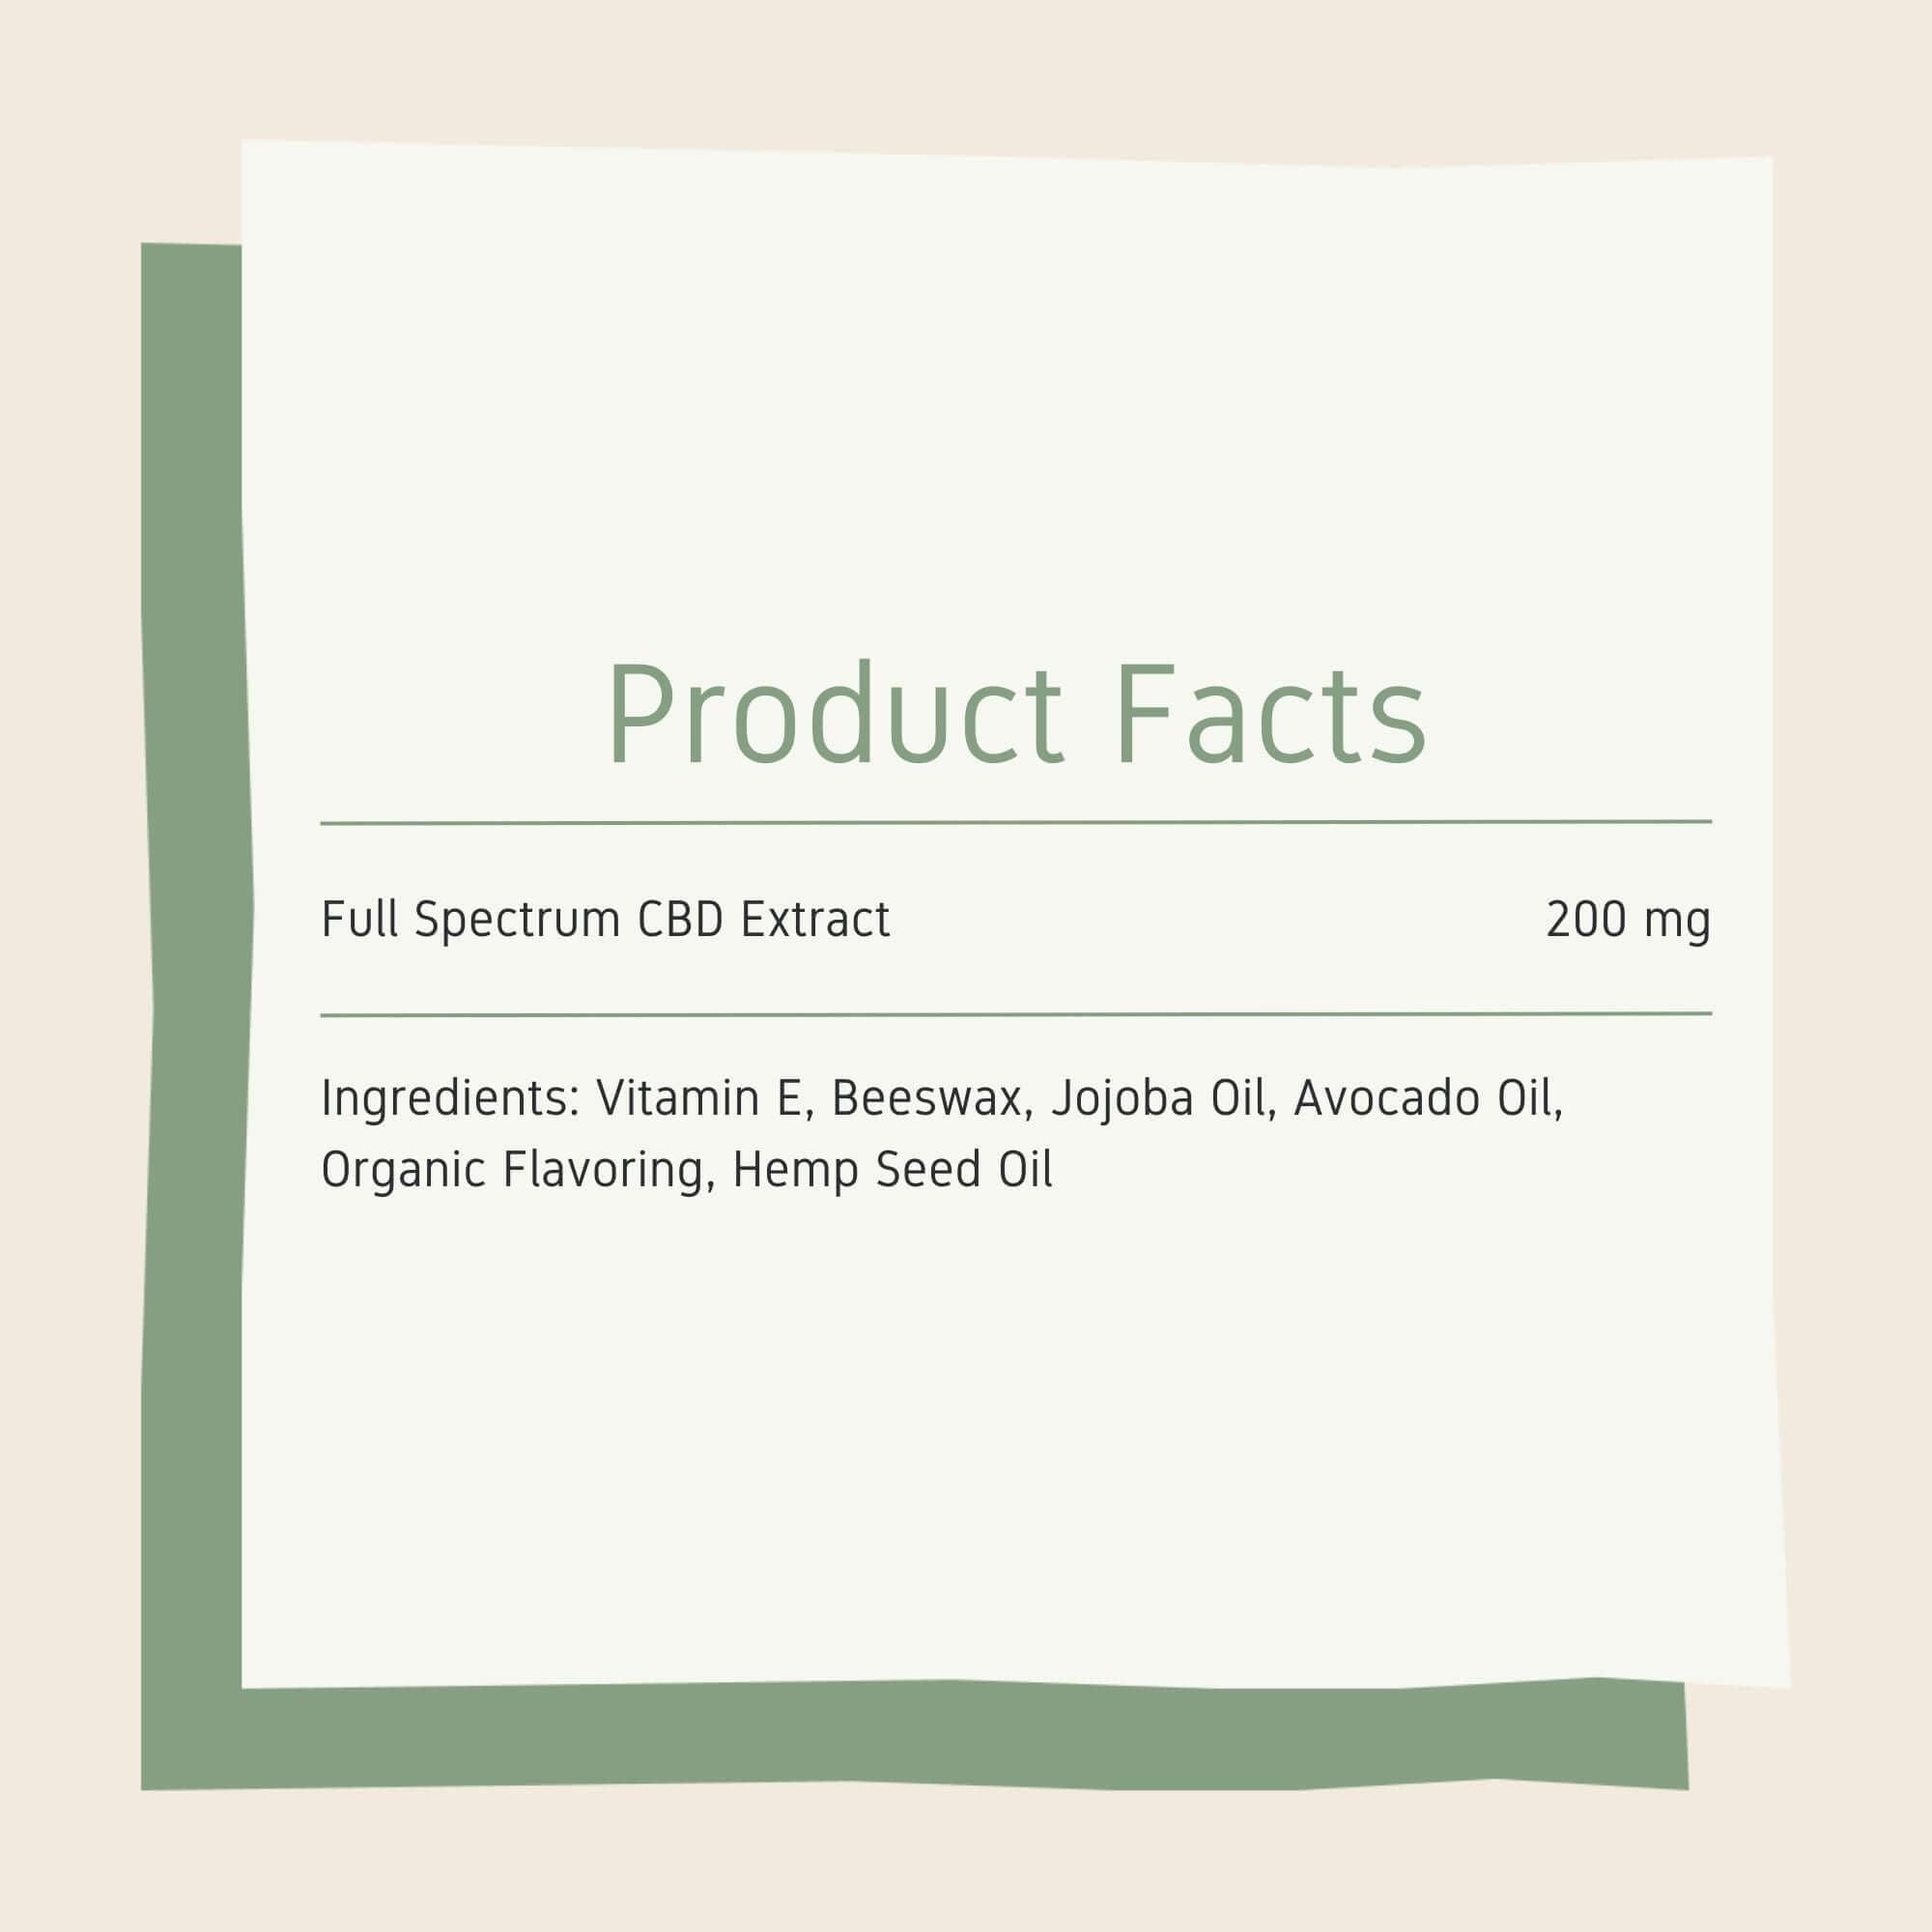 CBD Lip Balm 200mg product facts and full list of ingredients